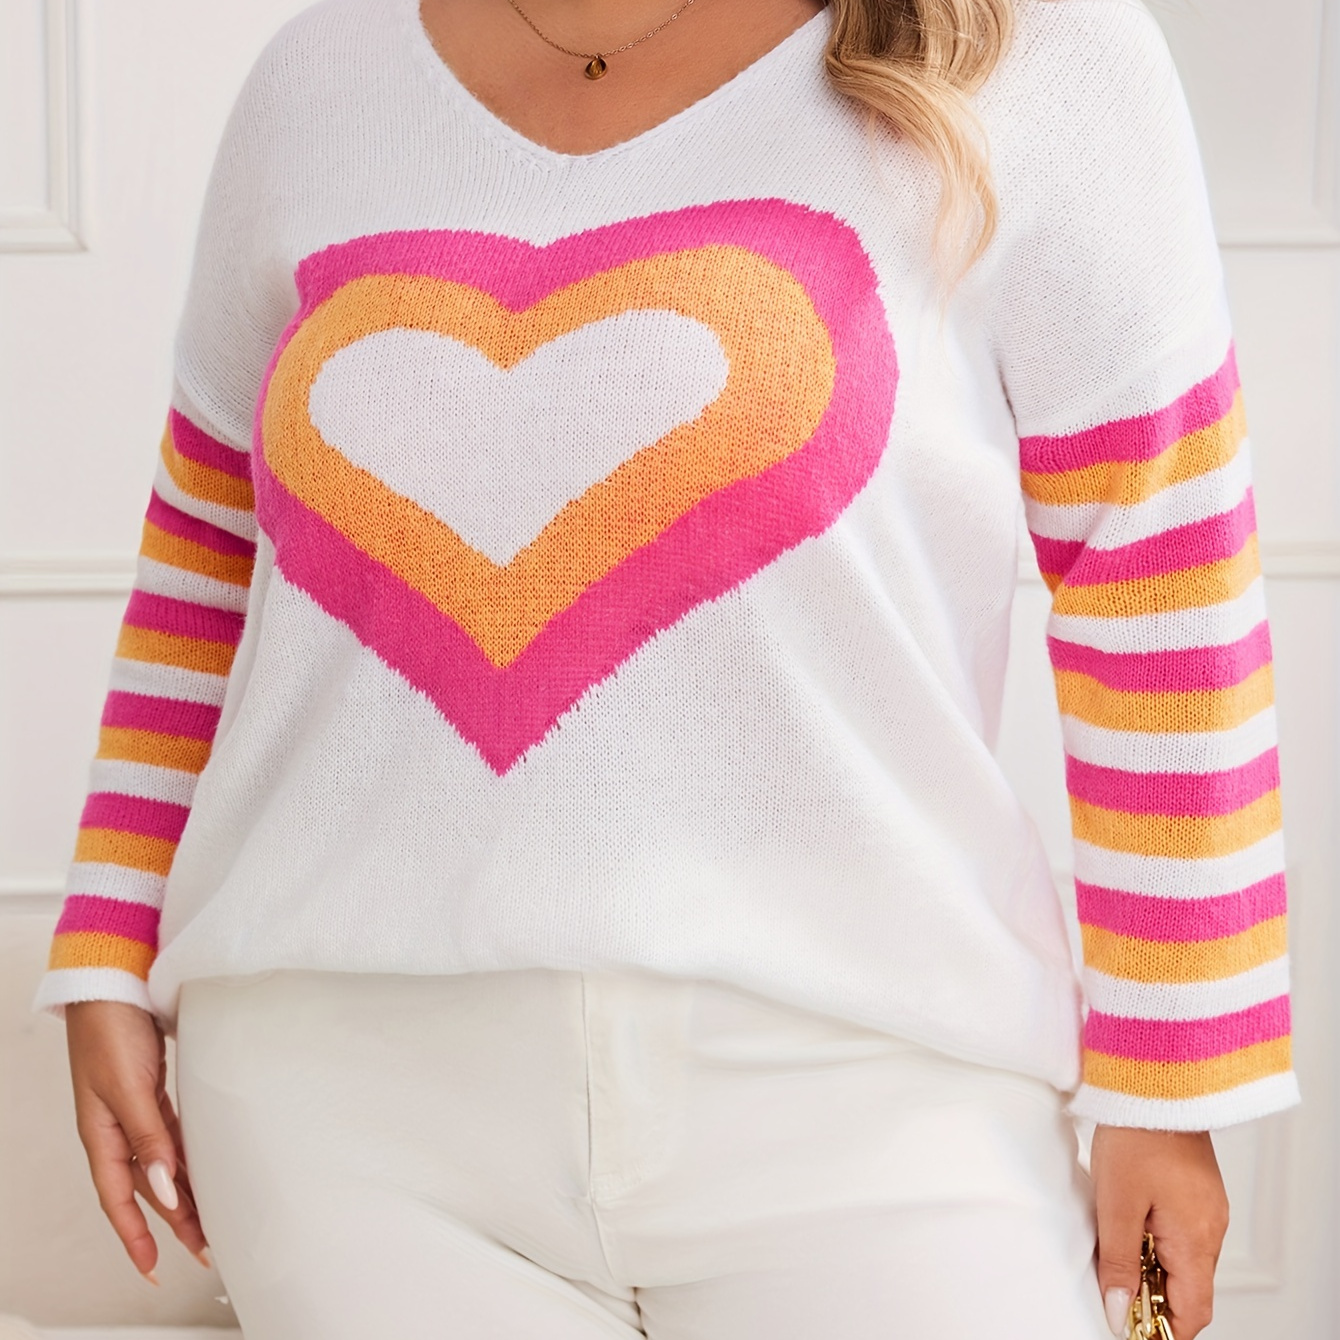 

Plus Size Heart Pattern Sweater, Causal Long Sleeve V Neck Knitted Top For Fall & Winter, Women's Plus Size Clothing